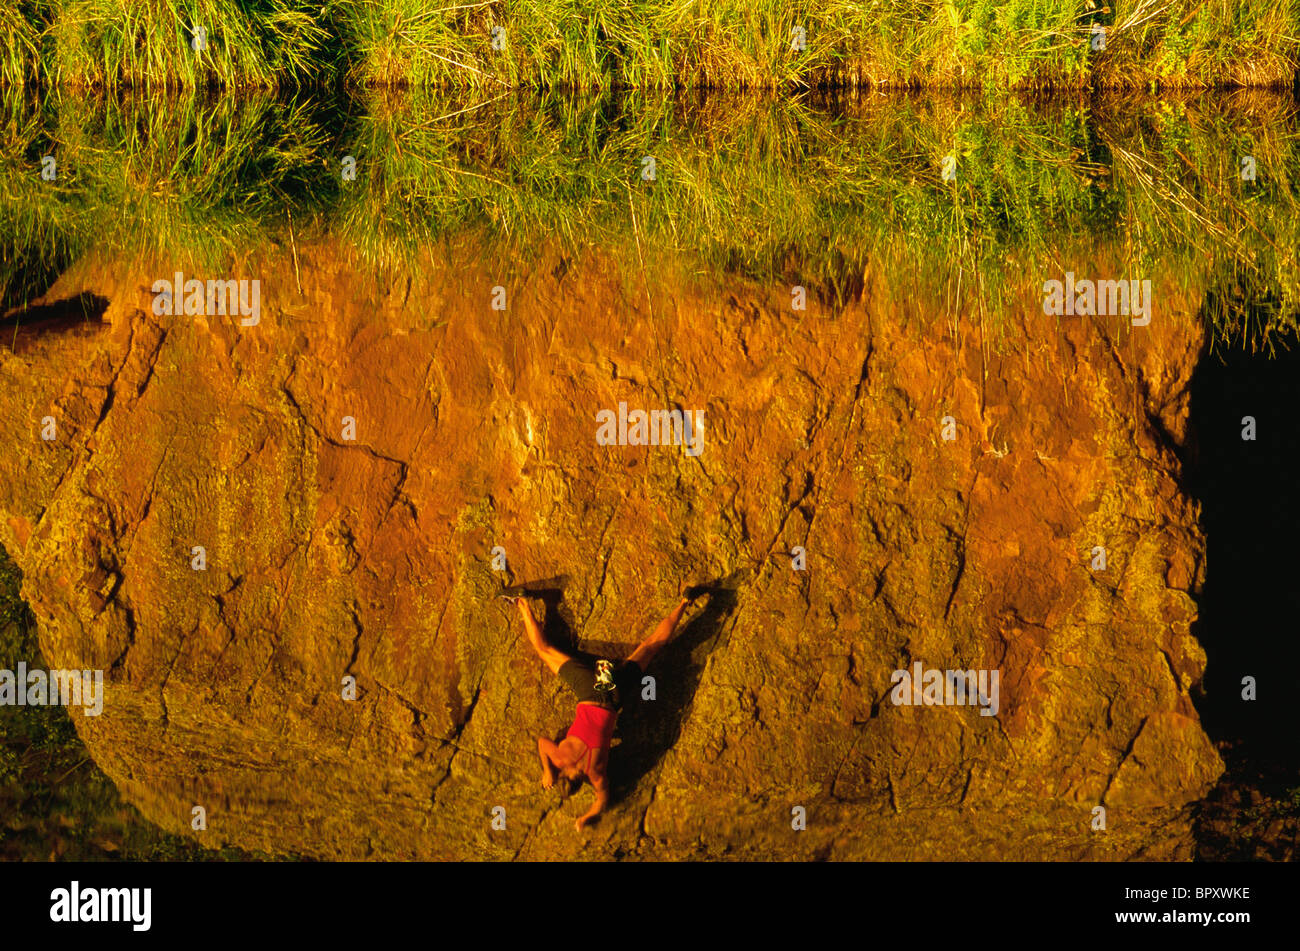 Reflection of a woman bouldering at the Scenic Boulder, CO. Stock Photo